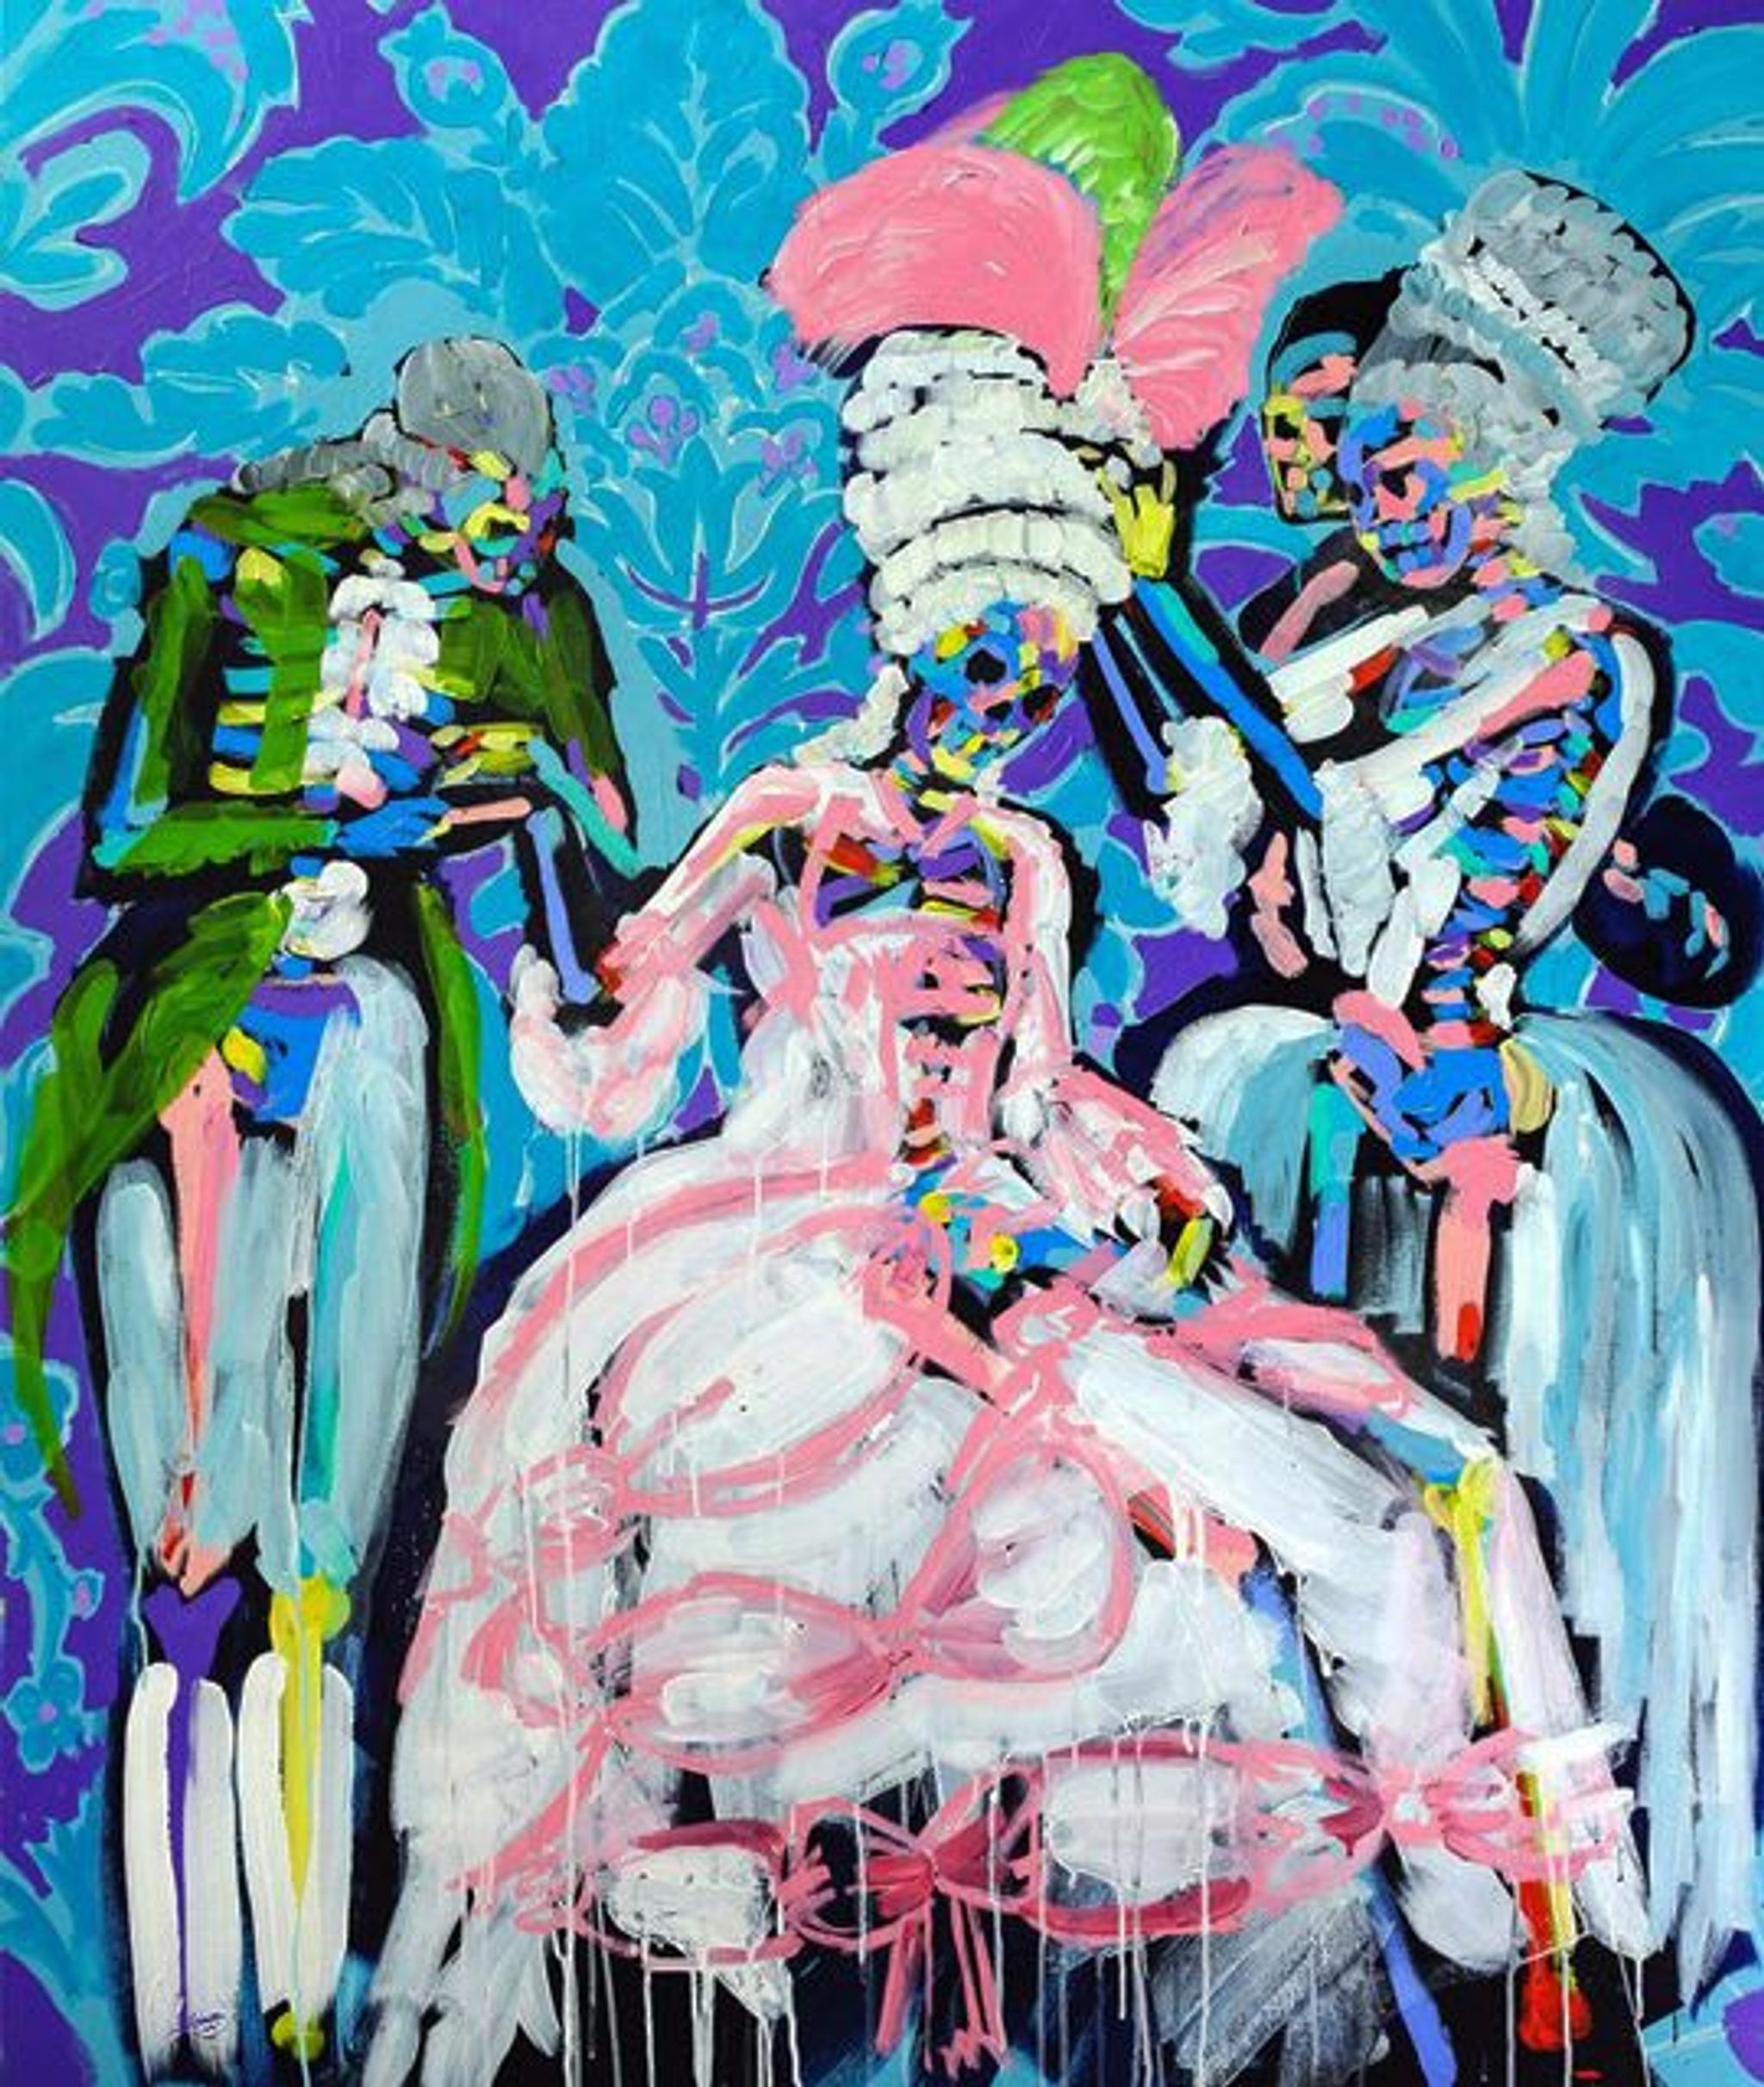 Bradley Theodore, "Marie On The Way To The Ball", 2017, Galleria Maddox.